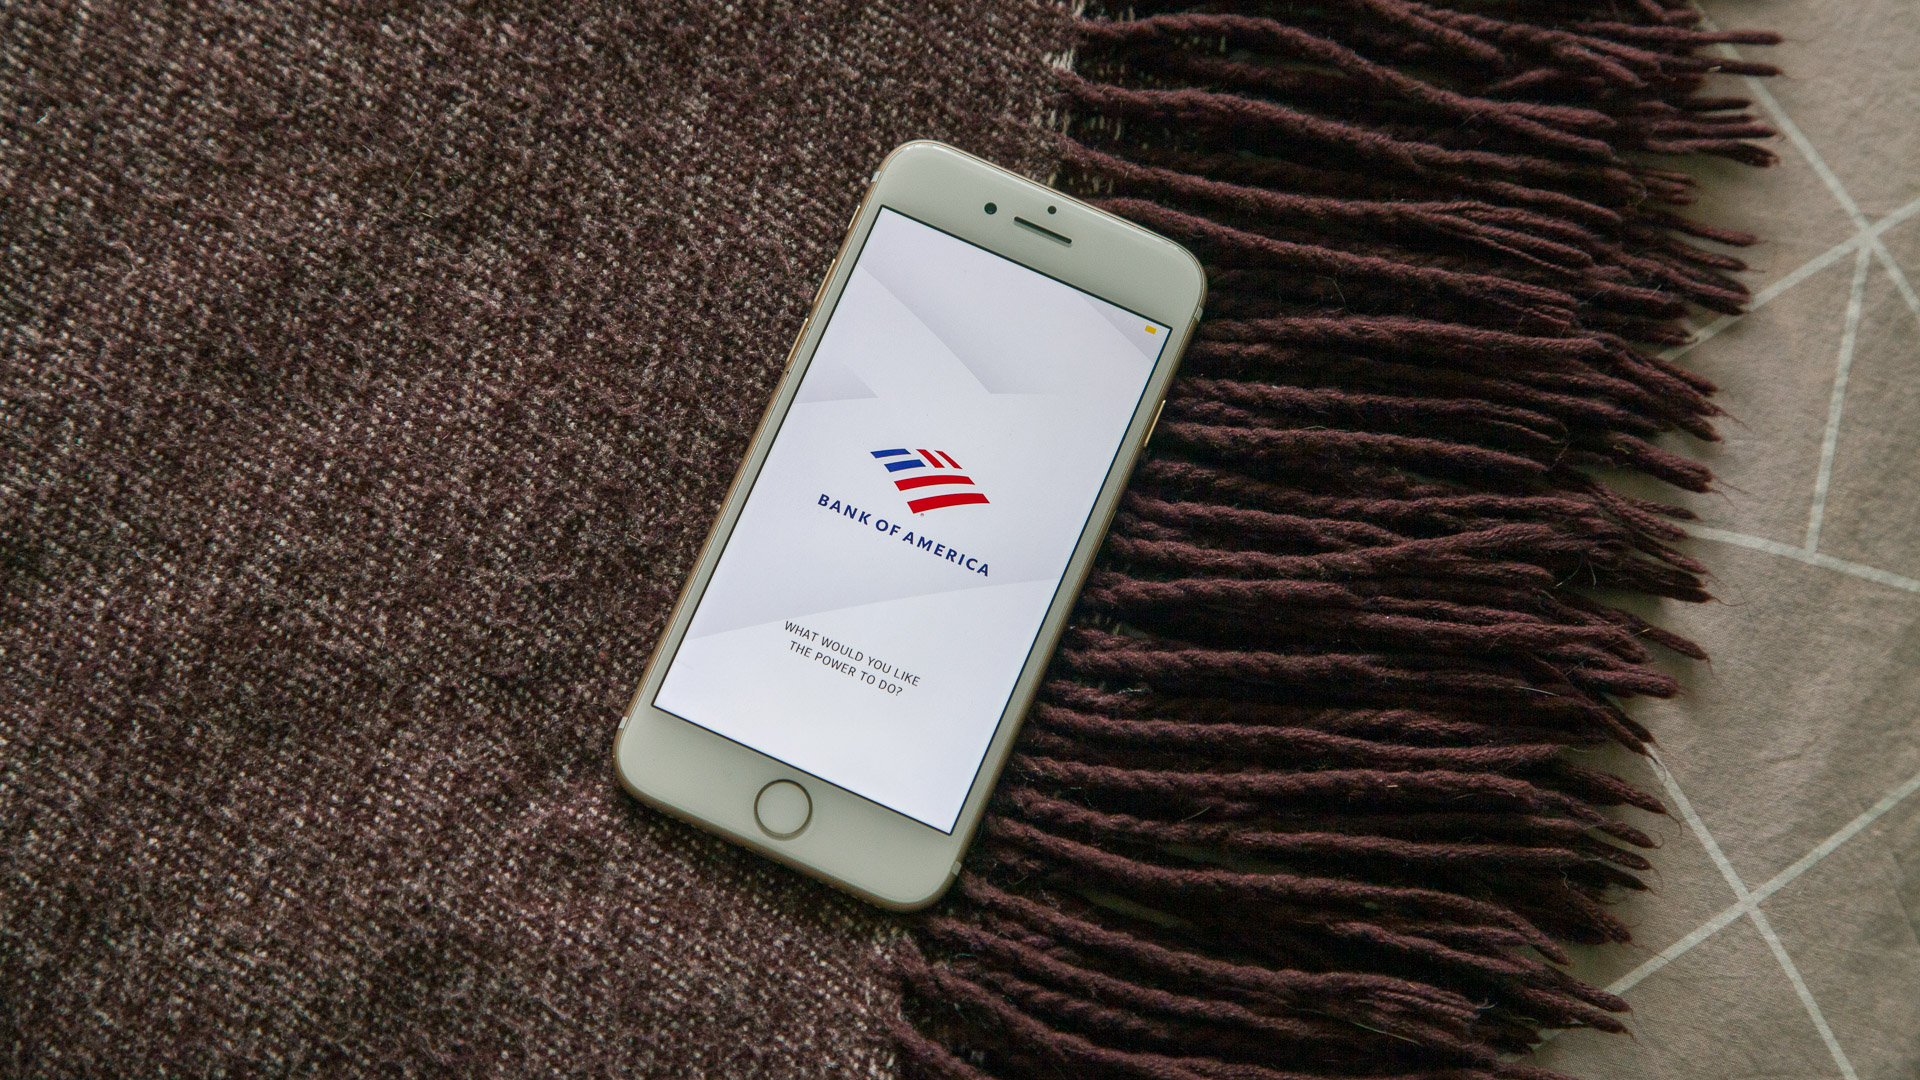 How to Deposit Check Online Bank of America